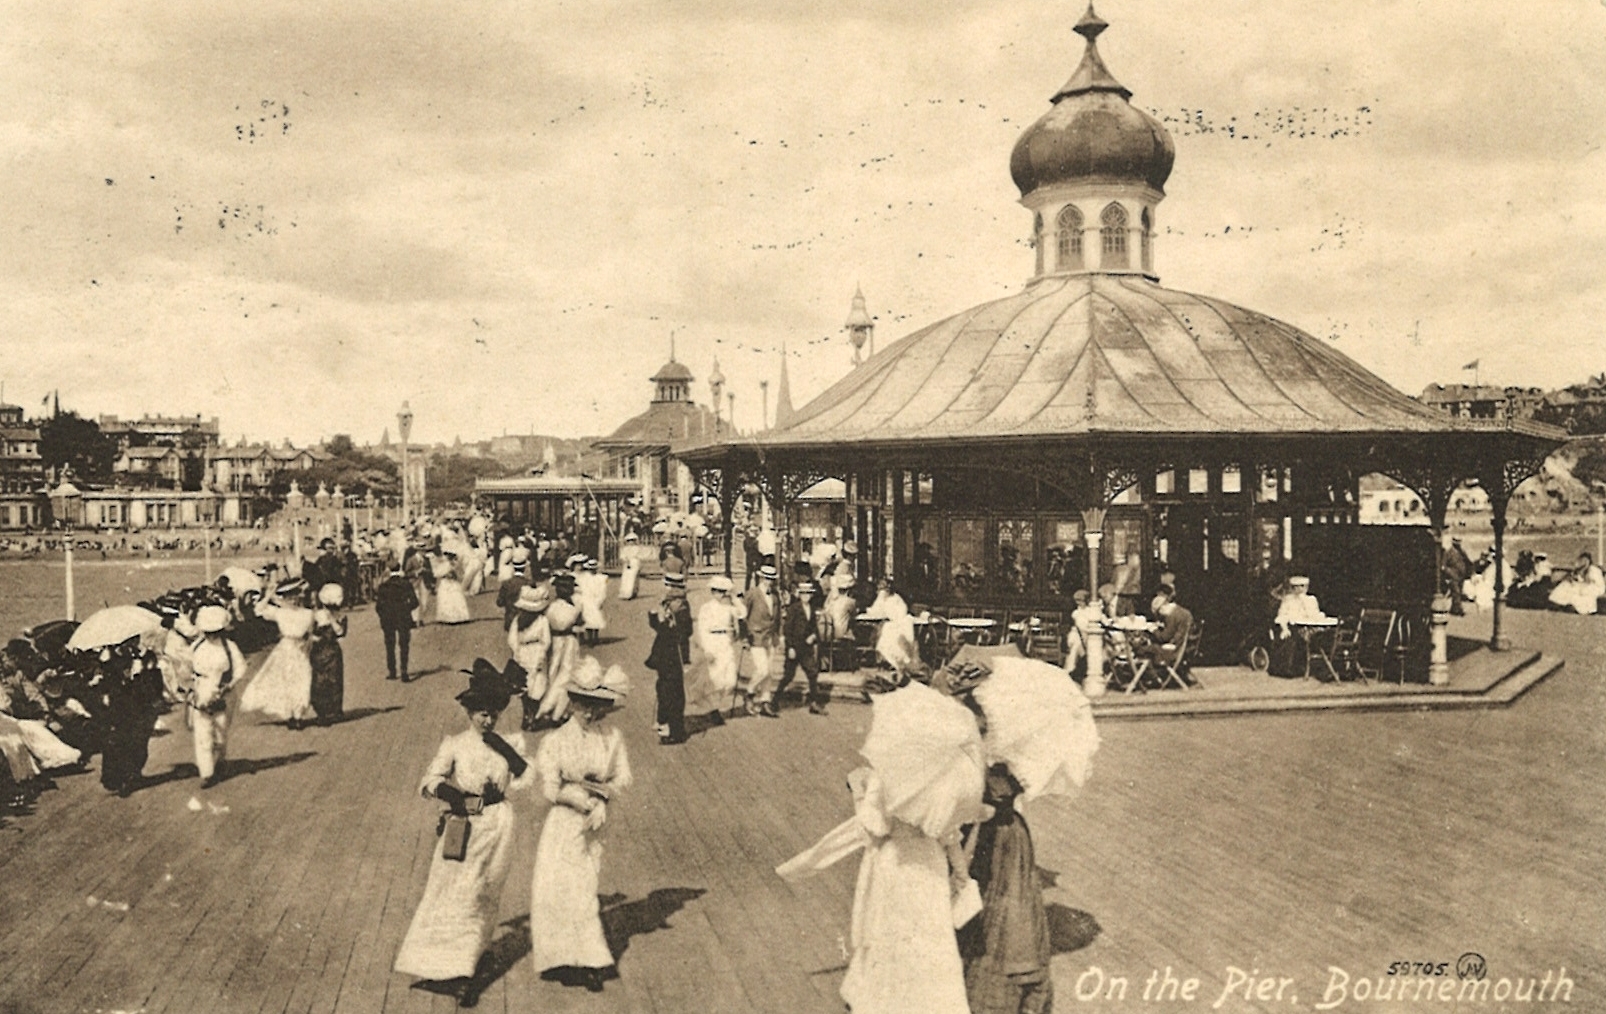 Mystery of Bournemouth Pier postcard is solved - Bournemouth Echo